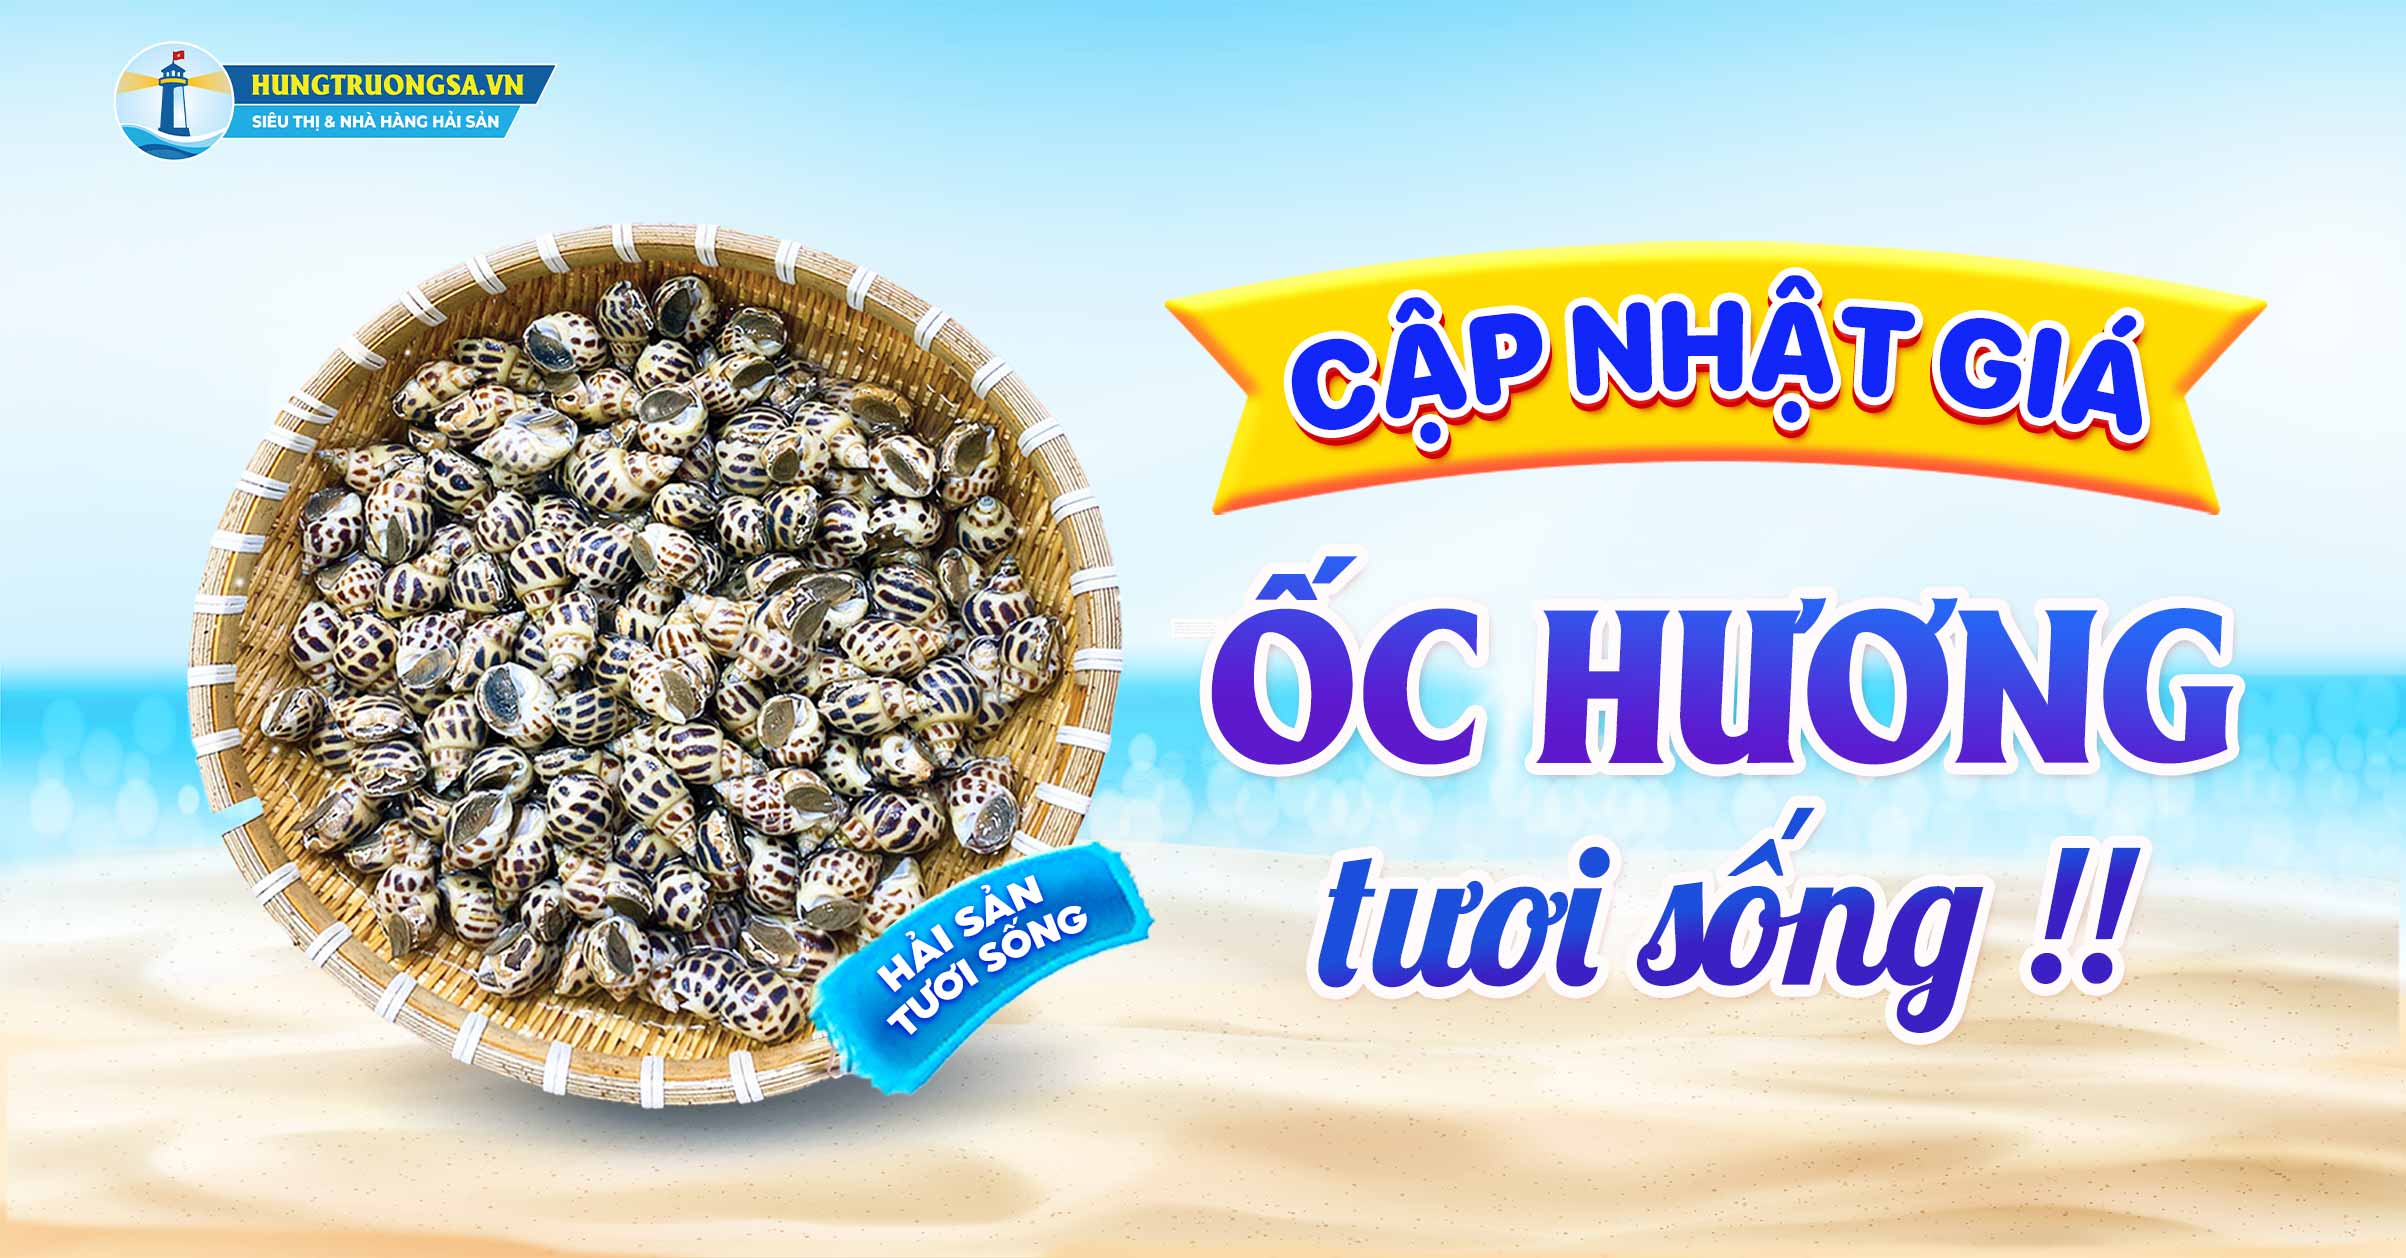 cap nhat gia oc huong tuoi song chi tiet